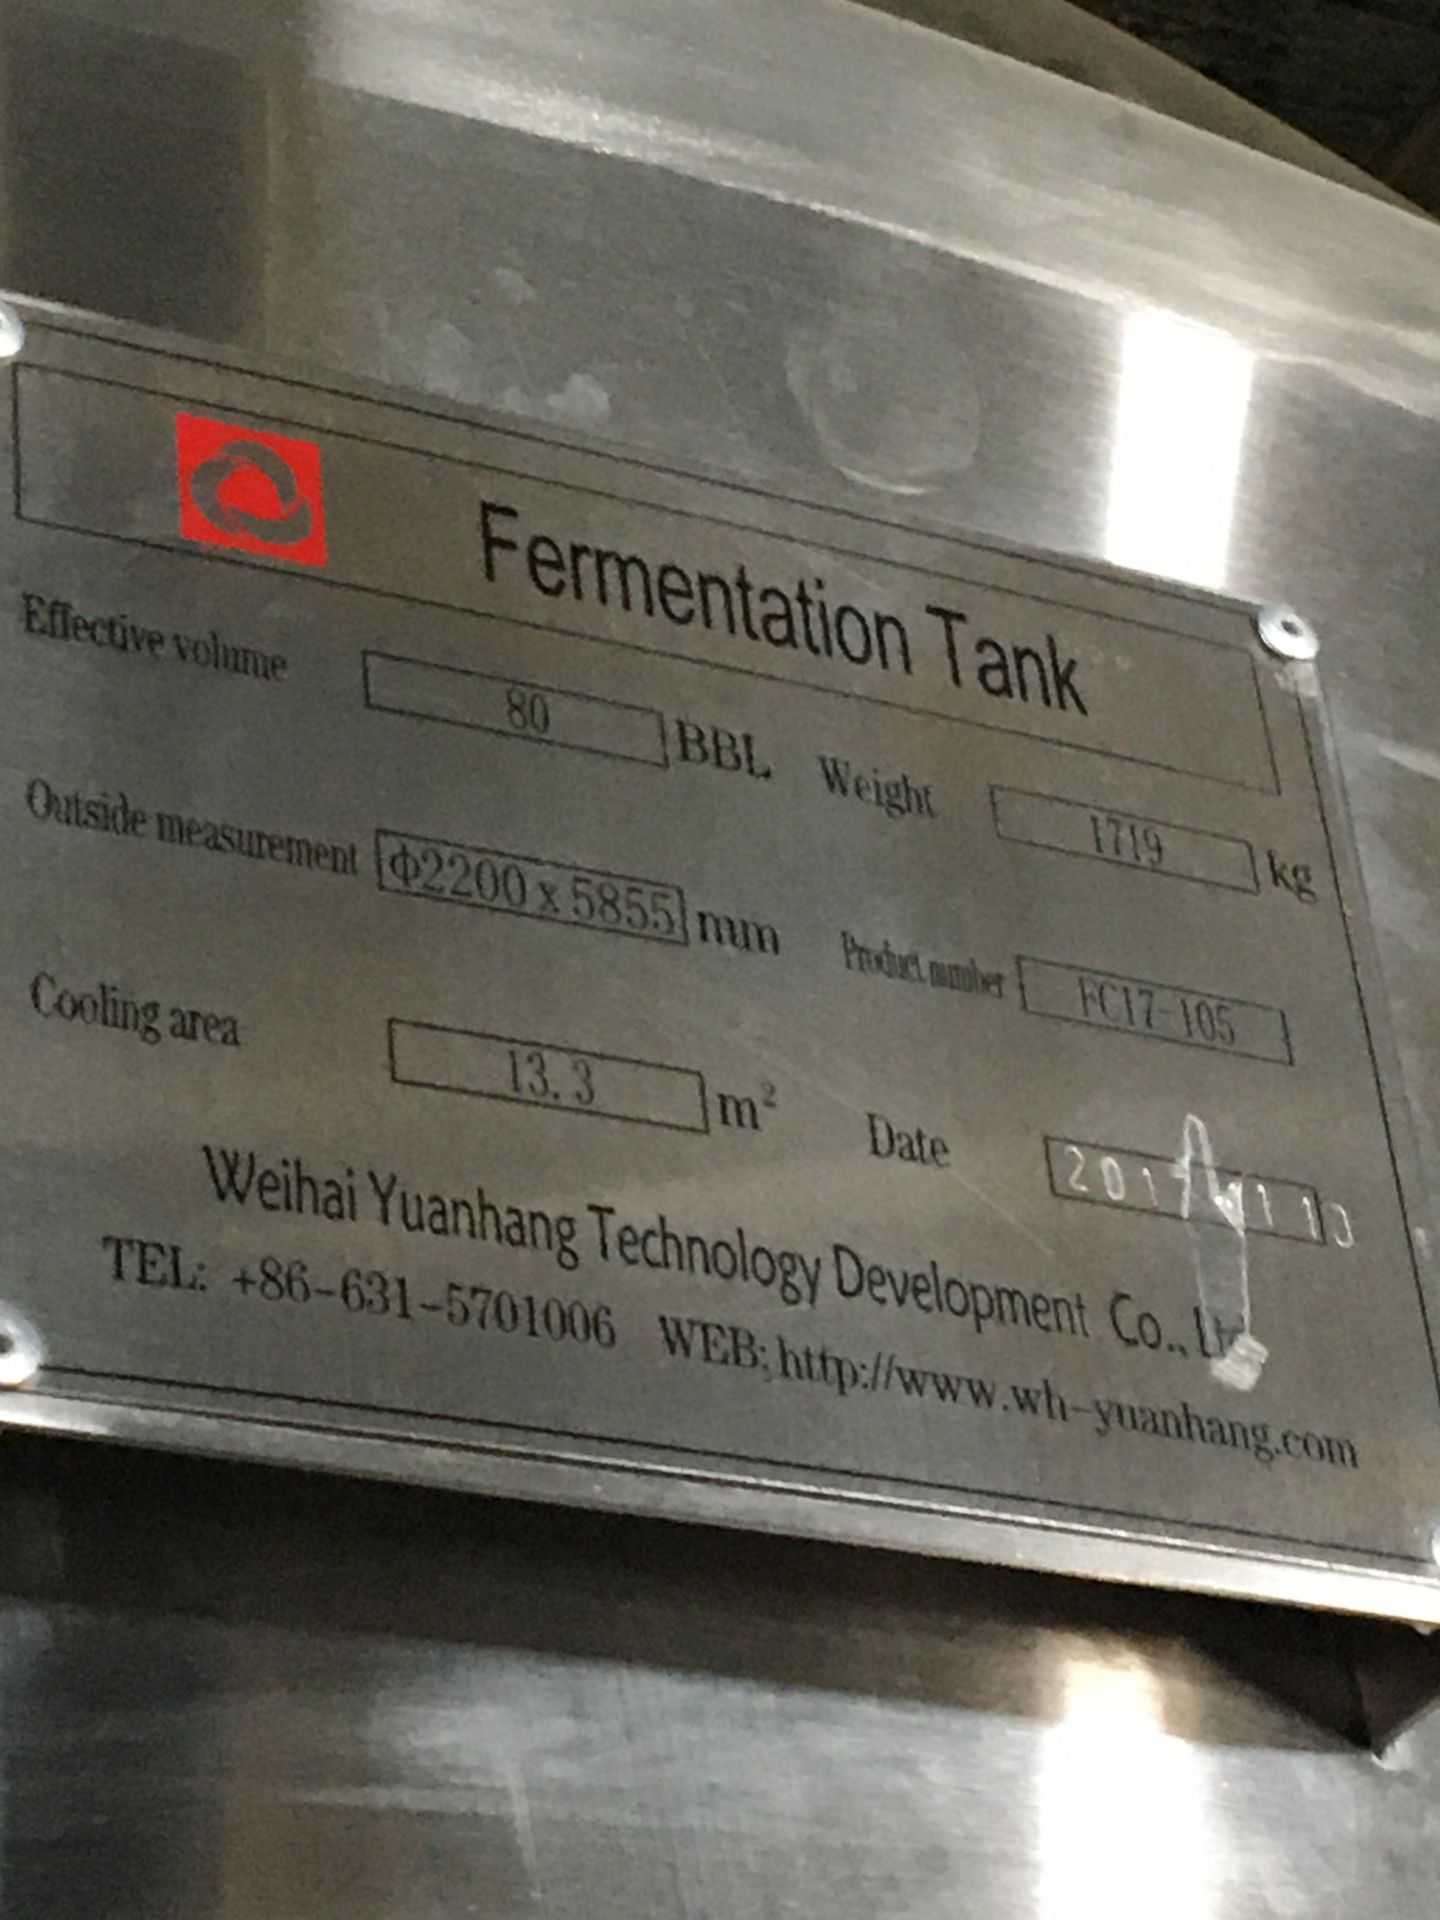 80-BBL Minnetonka Fermentation Tank, Model 80-BBL, Year 2017, Stainless Steel; Vessel store wort and - Image 15 of 17